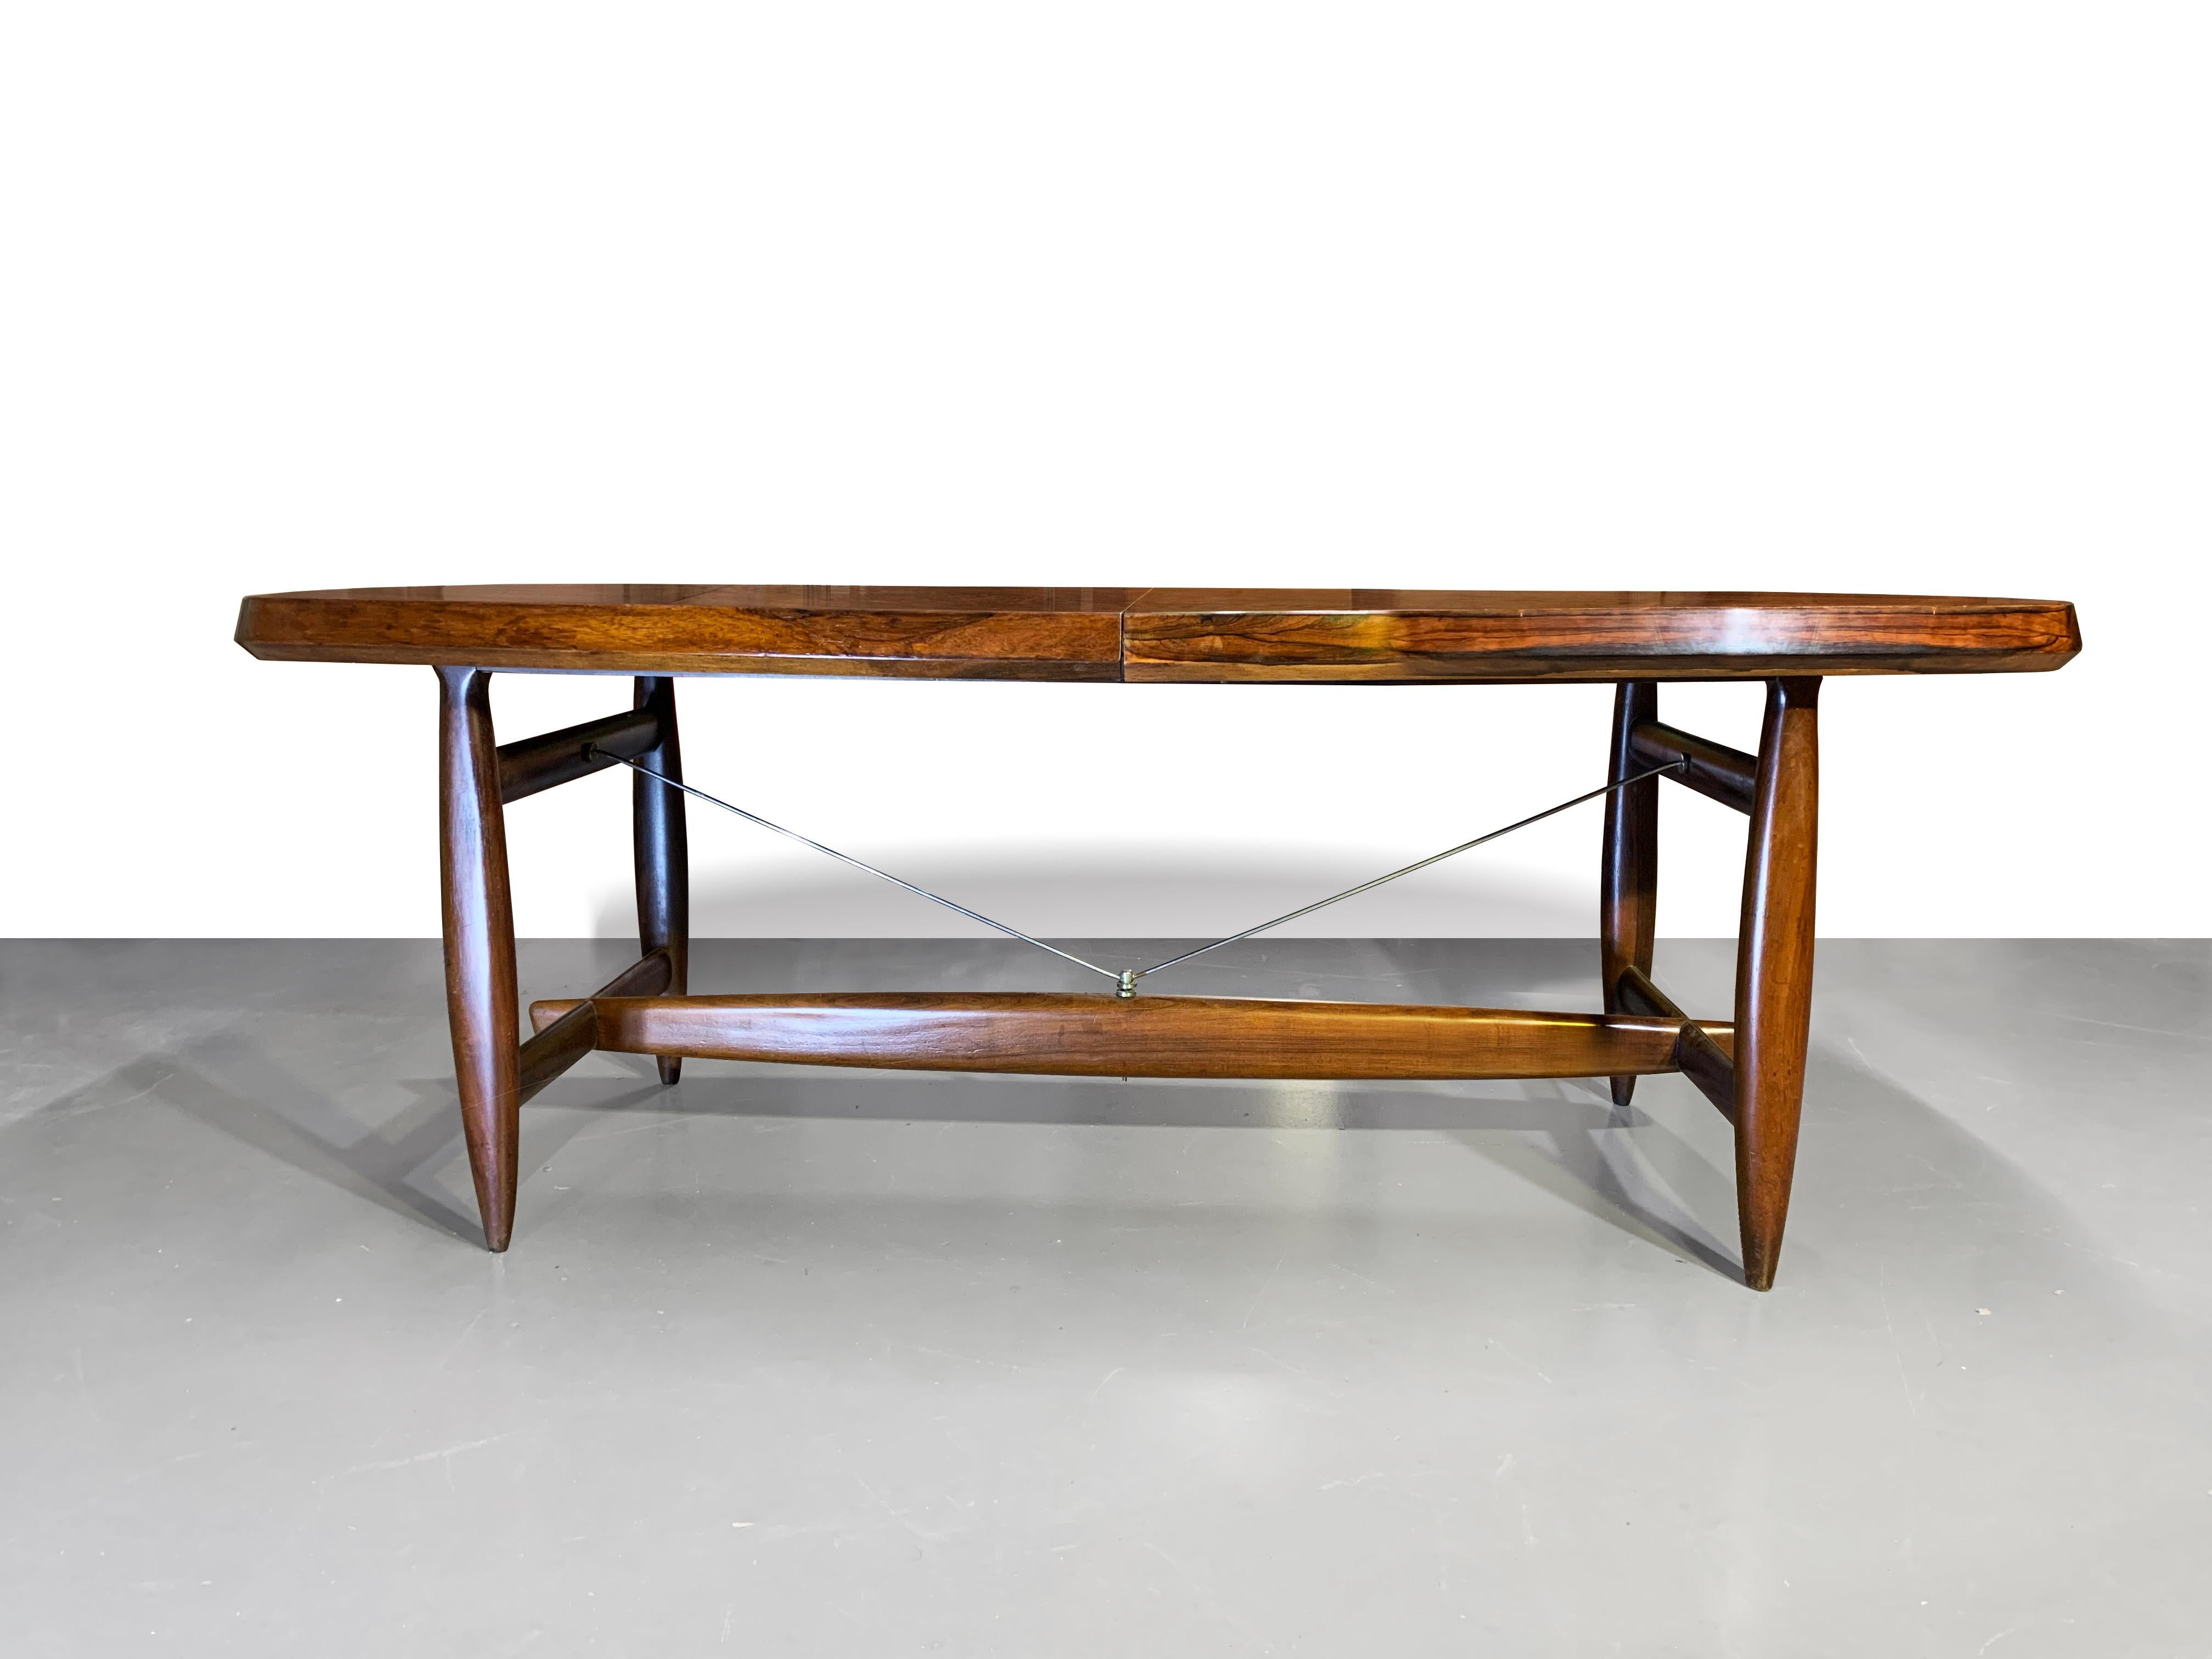 Stunning Brazilian extension dining table designed by Sergio Rodrigues for OCA, Brazil, 1958.
Largely constructed in solid wood and brass hardware details.
The round edged top features an integrated hidden leaf that can extend the table.

The name